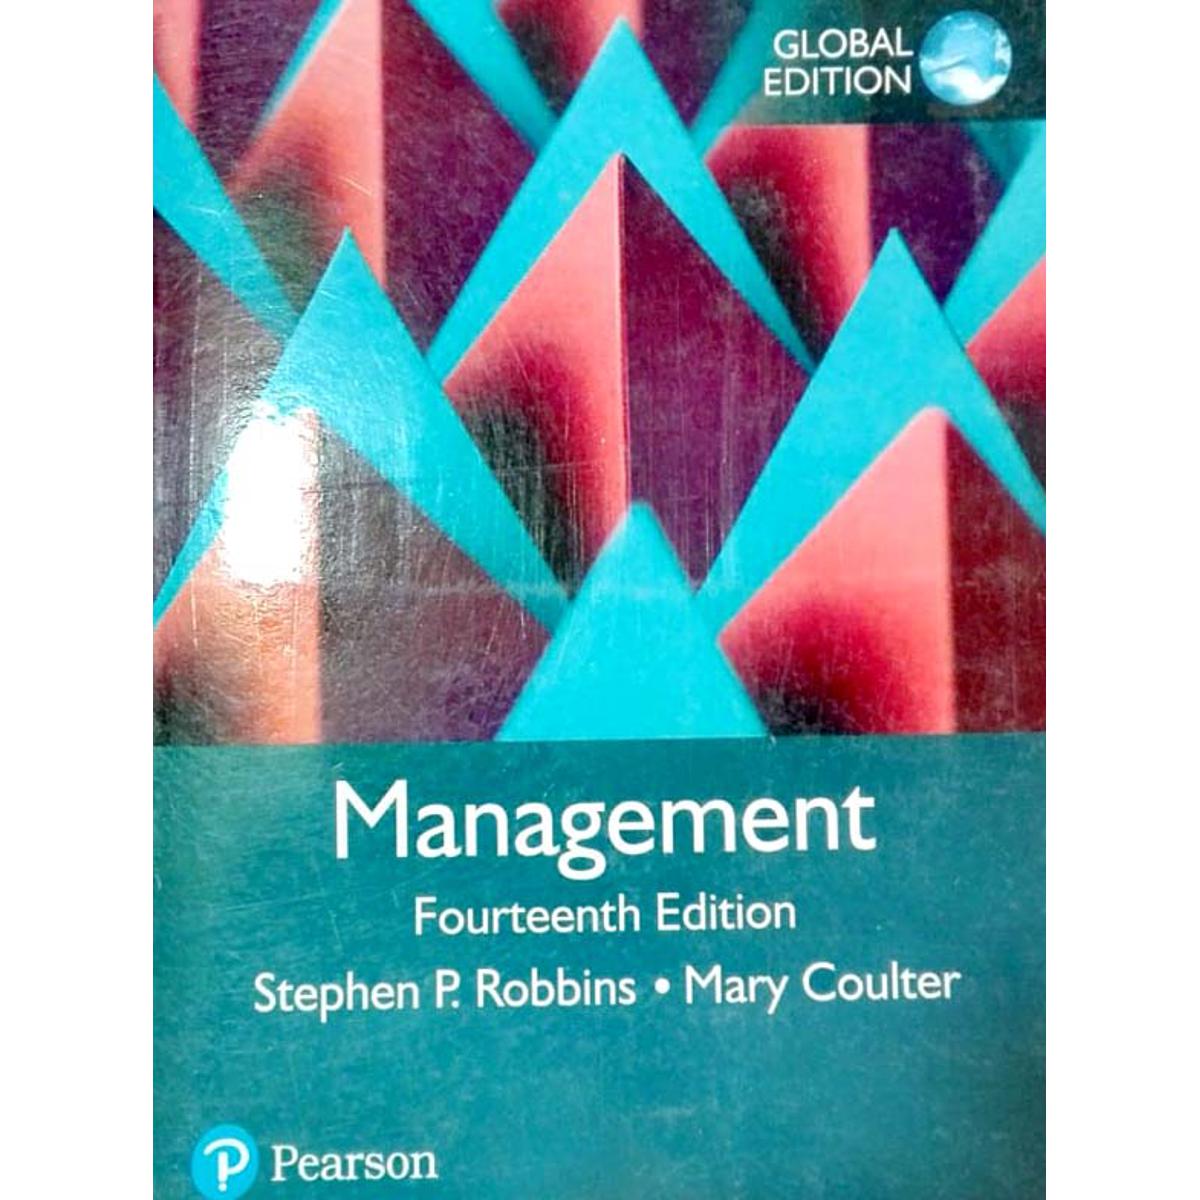 Management 14th Edition ( Stephen P. Robbins & Mary Coulter)